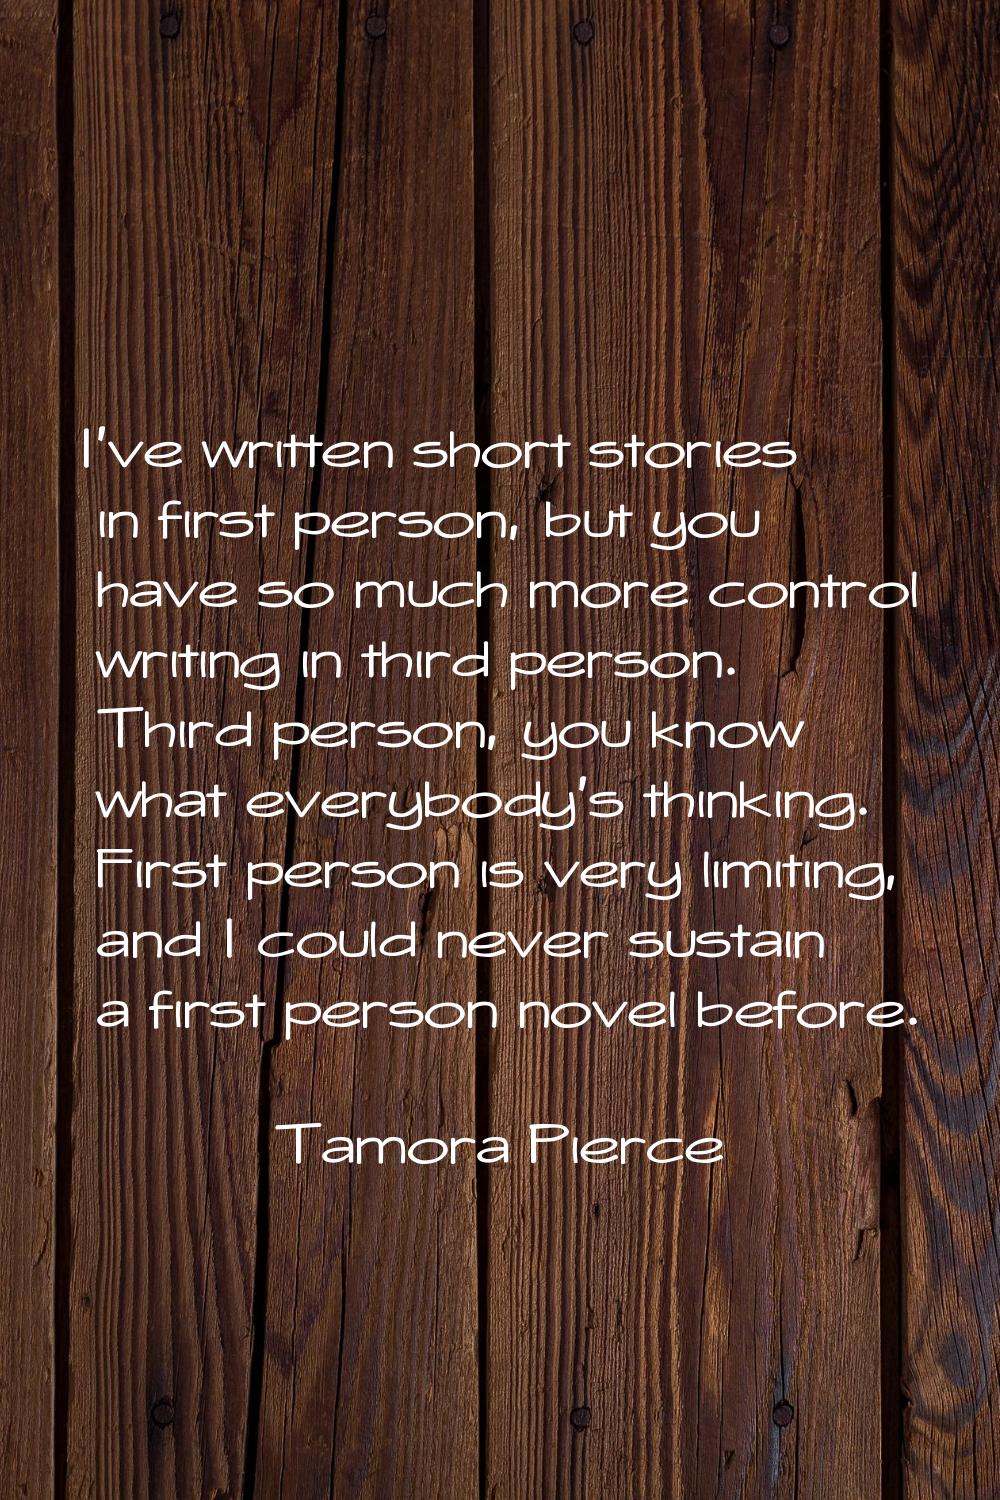 I've written short stories in first person, but you have so much more control writing in third pers